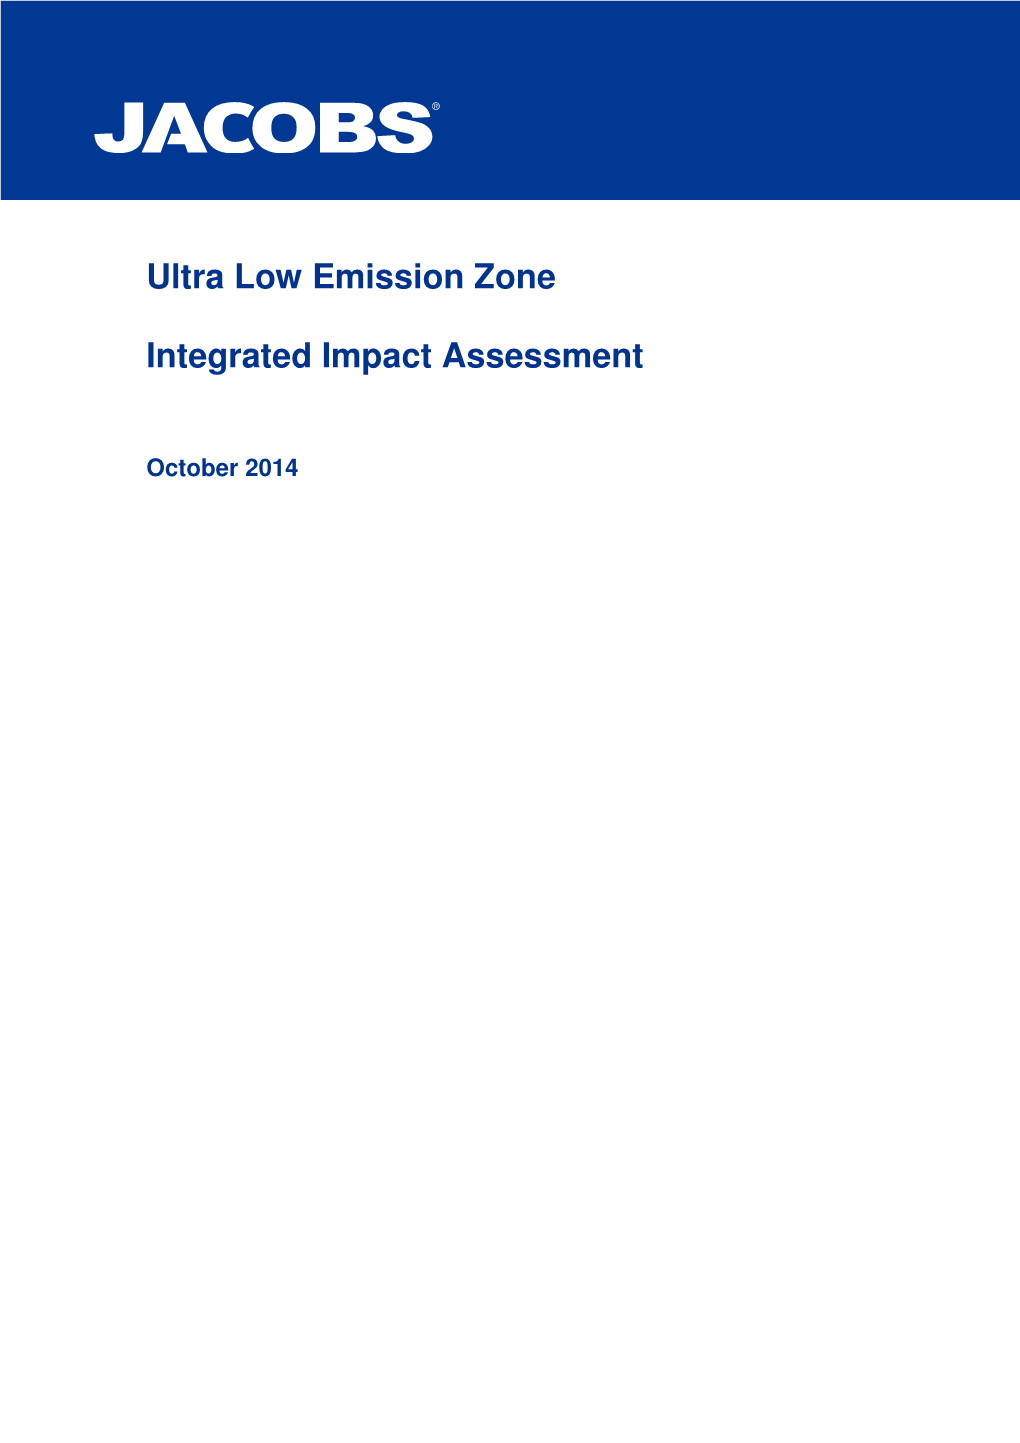 Ultra Low Emission Zone Integrated Impact Assessment